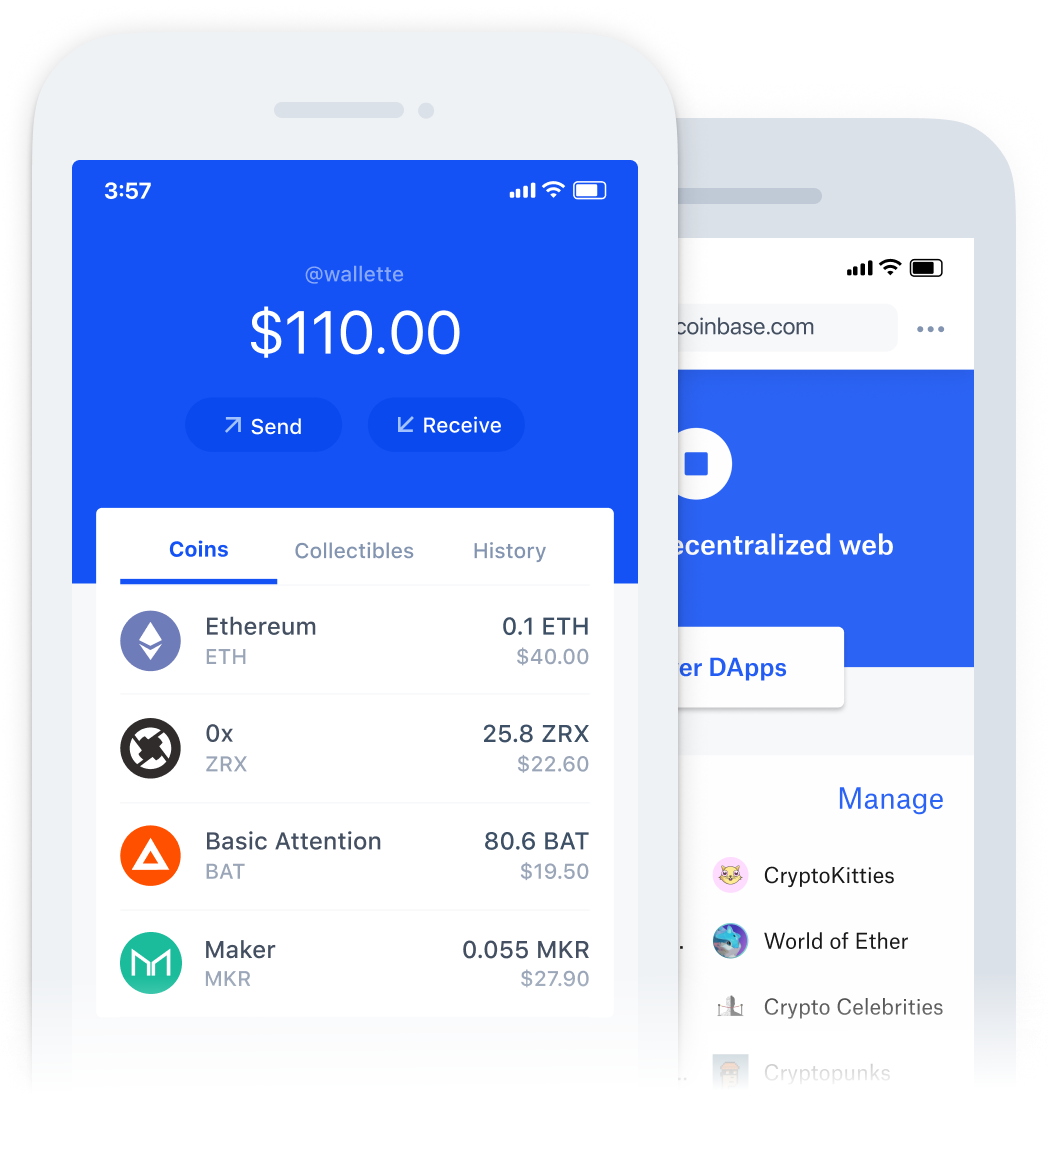 coinbase business operations